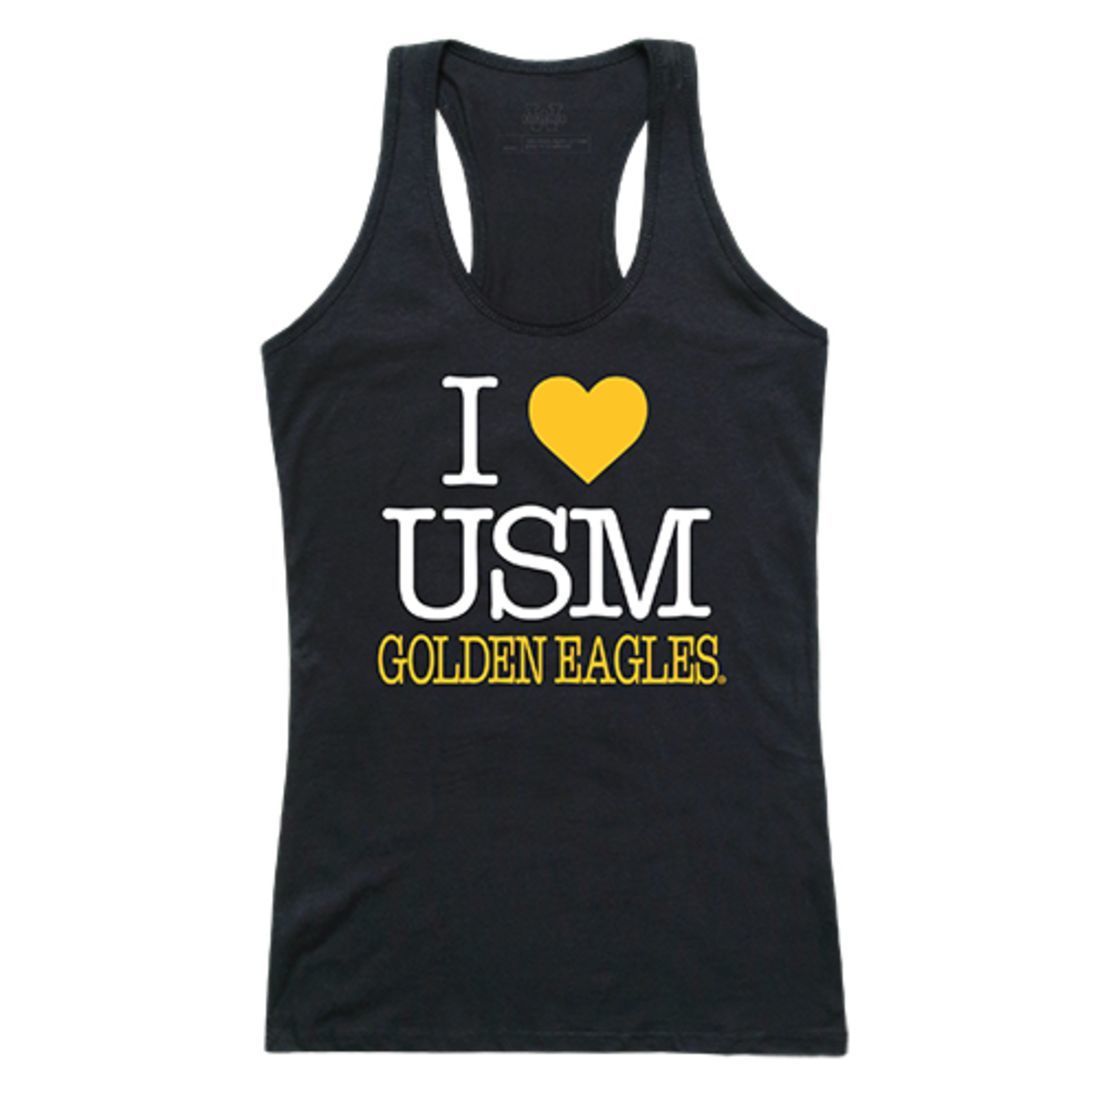 USM University of Southern Mississippi Golden Eagles Womens Love Tank Top Tee T-Shirt Black-Campus-Wardrobe